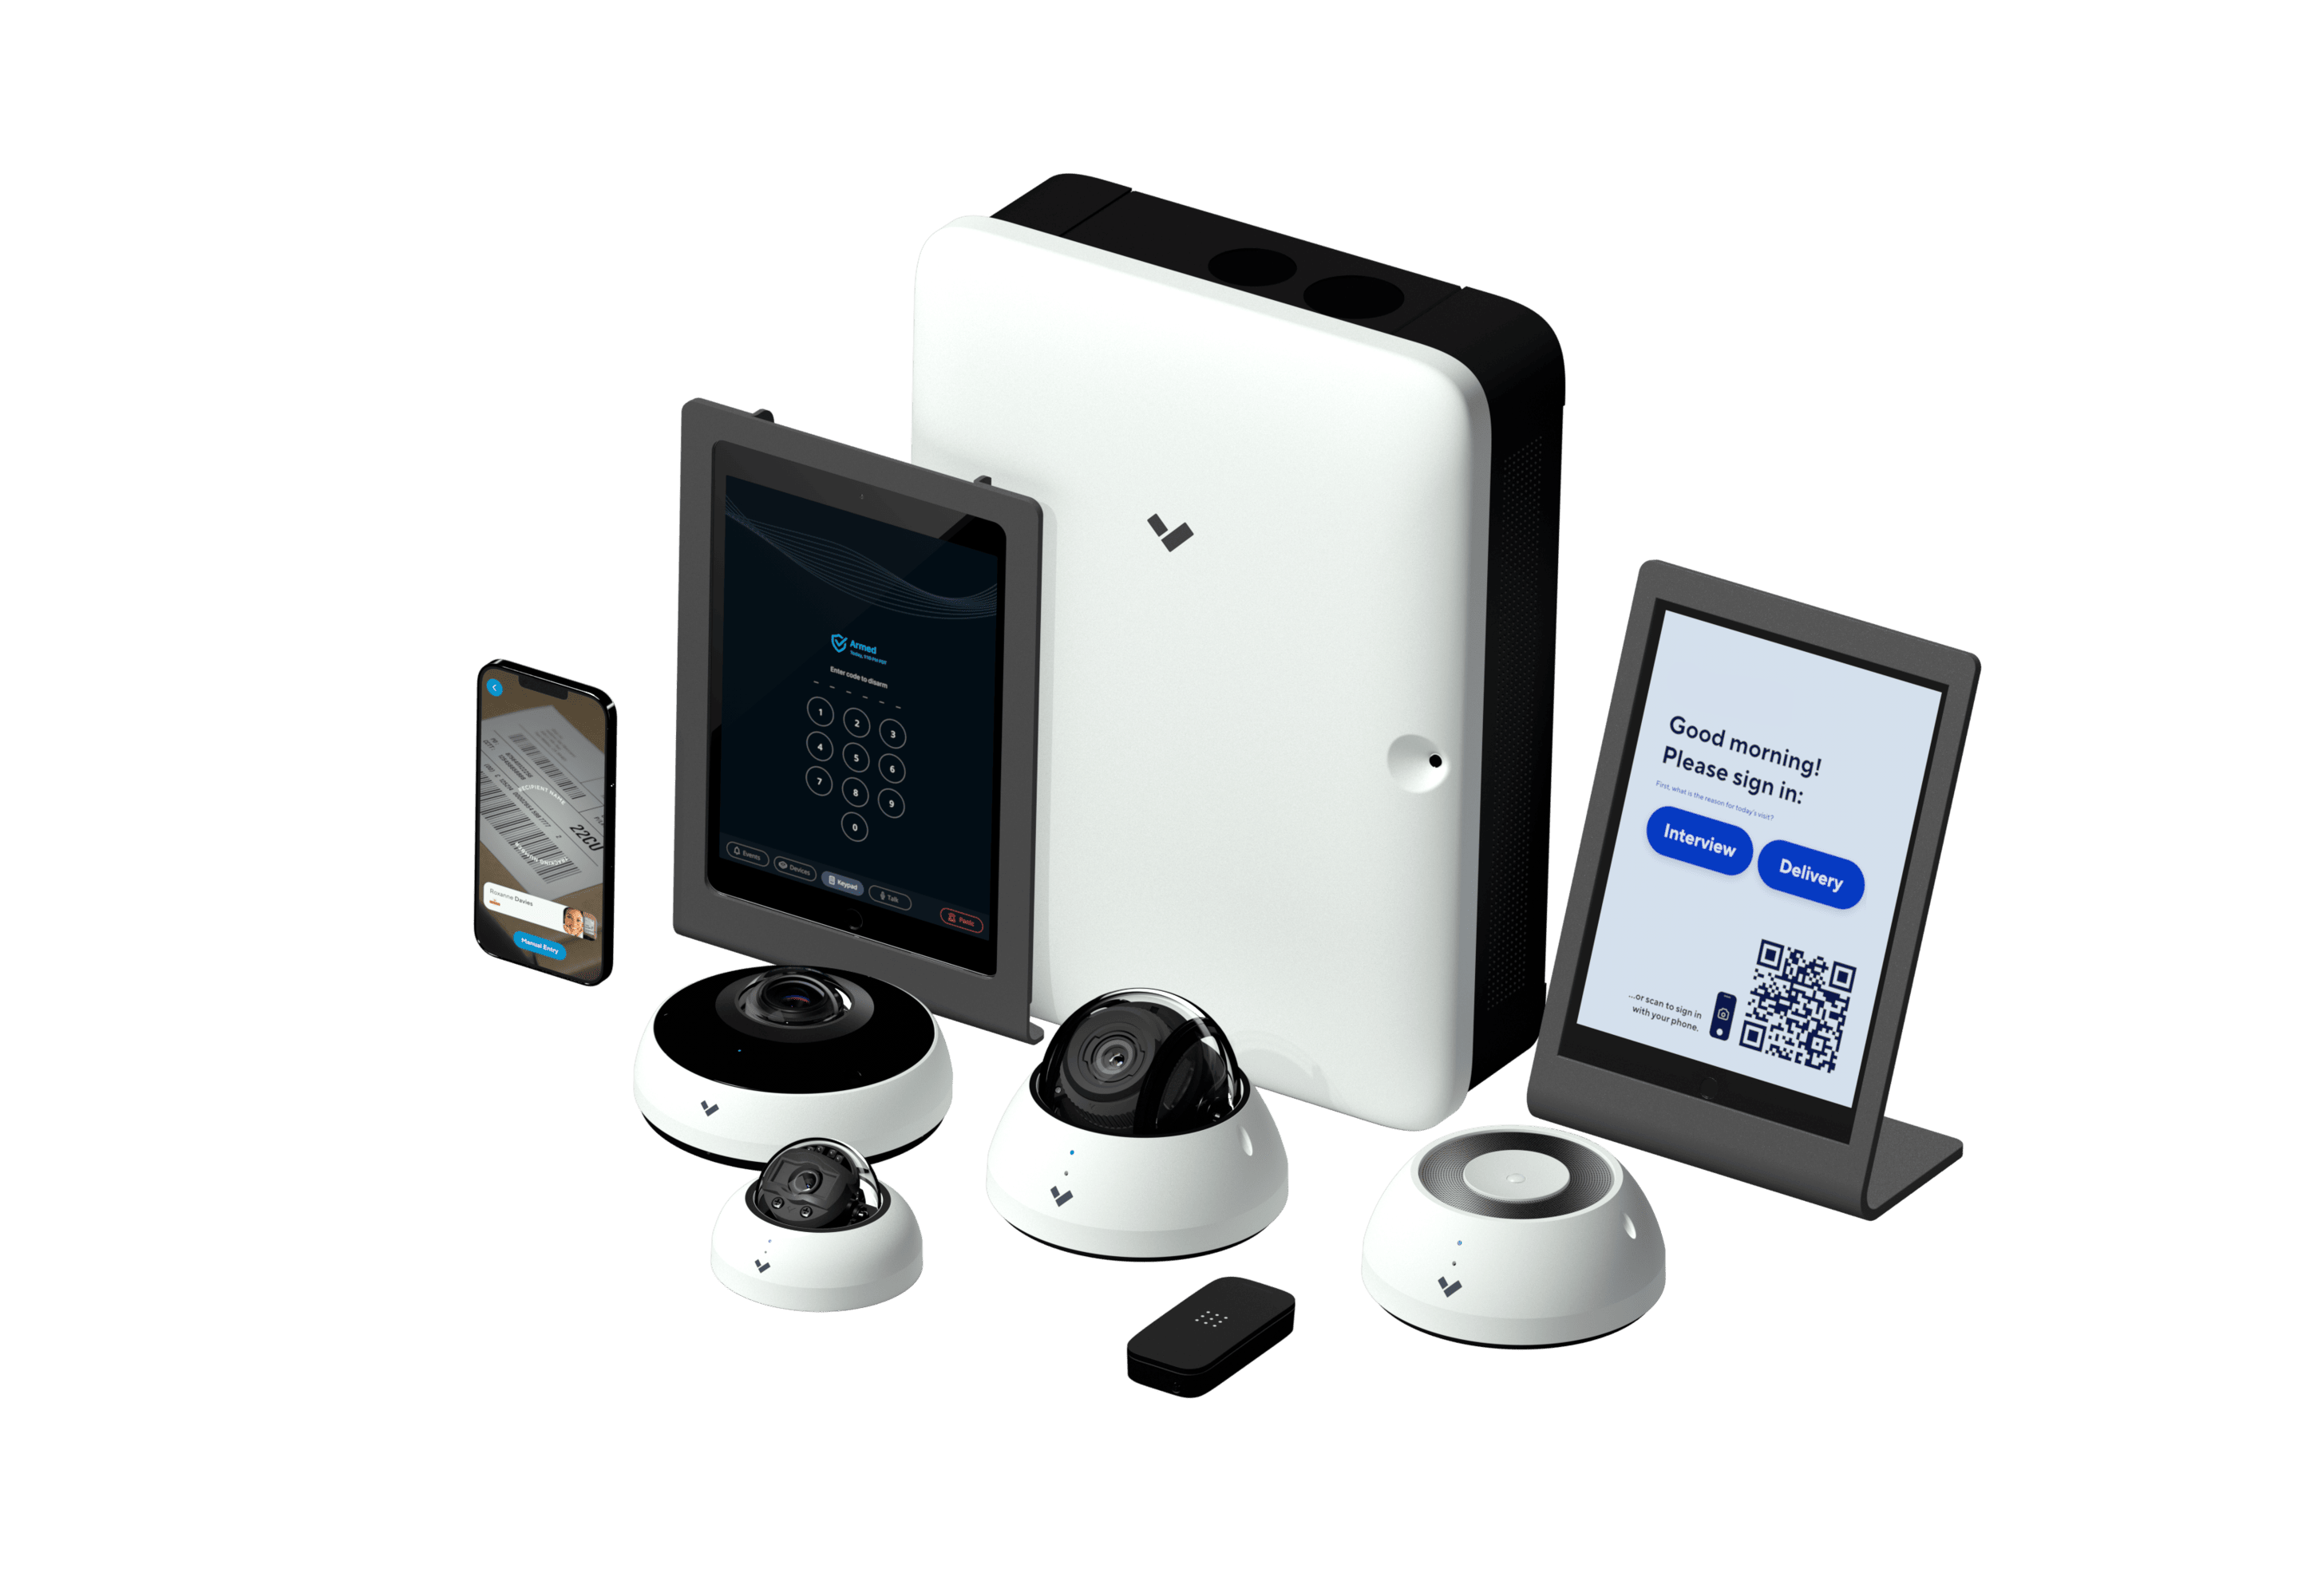 Verkada devices for warehouse security systems